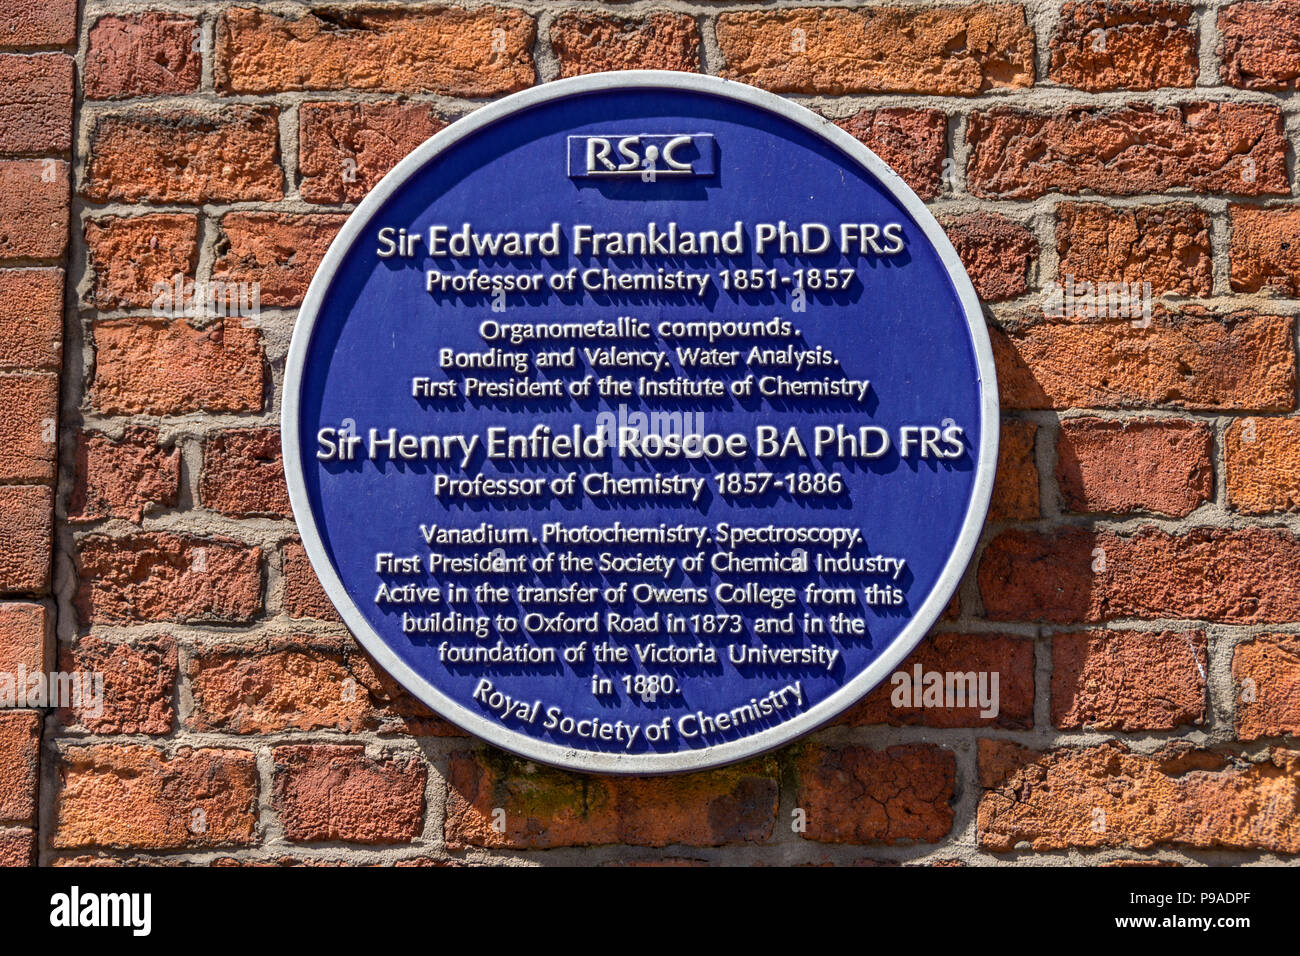 Blue plaque commemorating Sir Edward Frankland and Sir Henry Enfield Roscoe, Professors of Chemistry., Byrom Street, Manchester, England, UK. Stock Photo